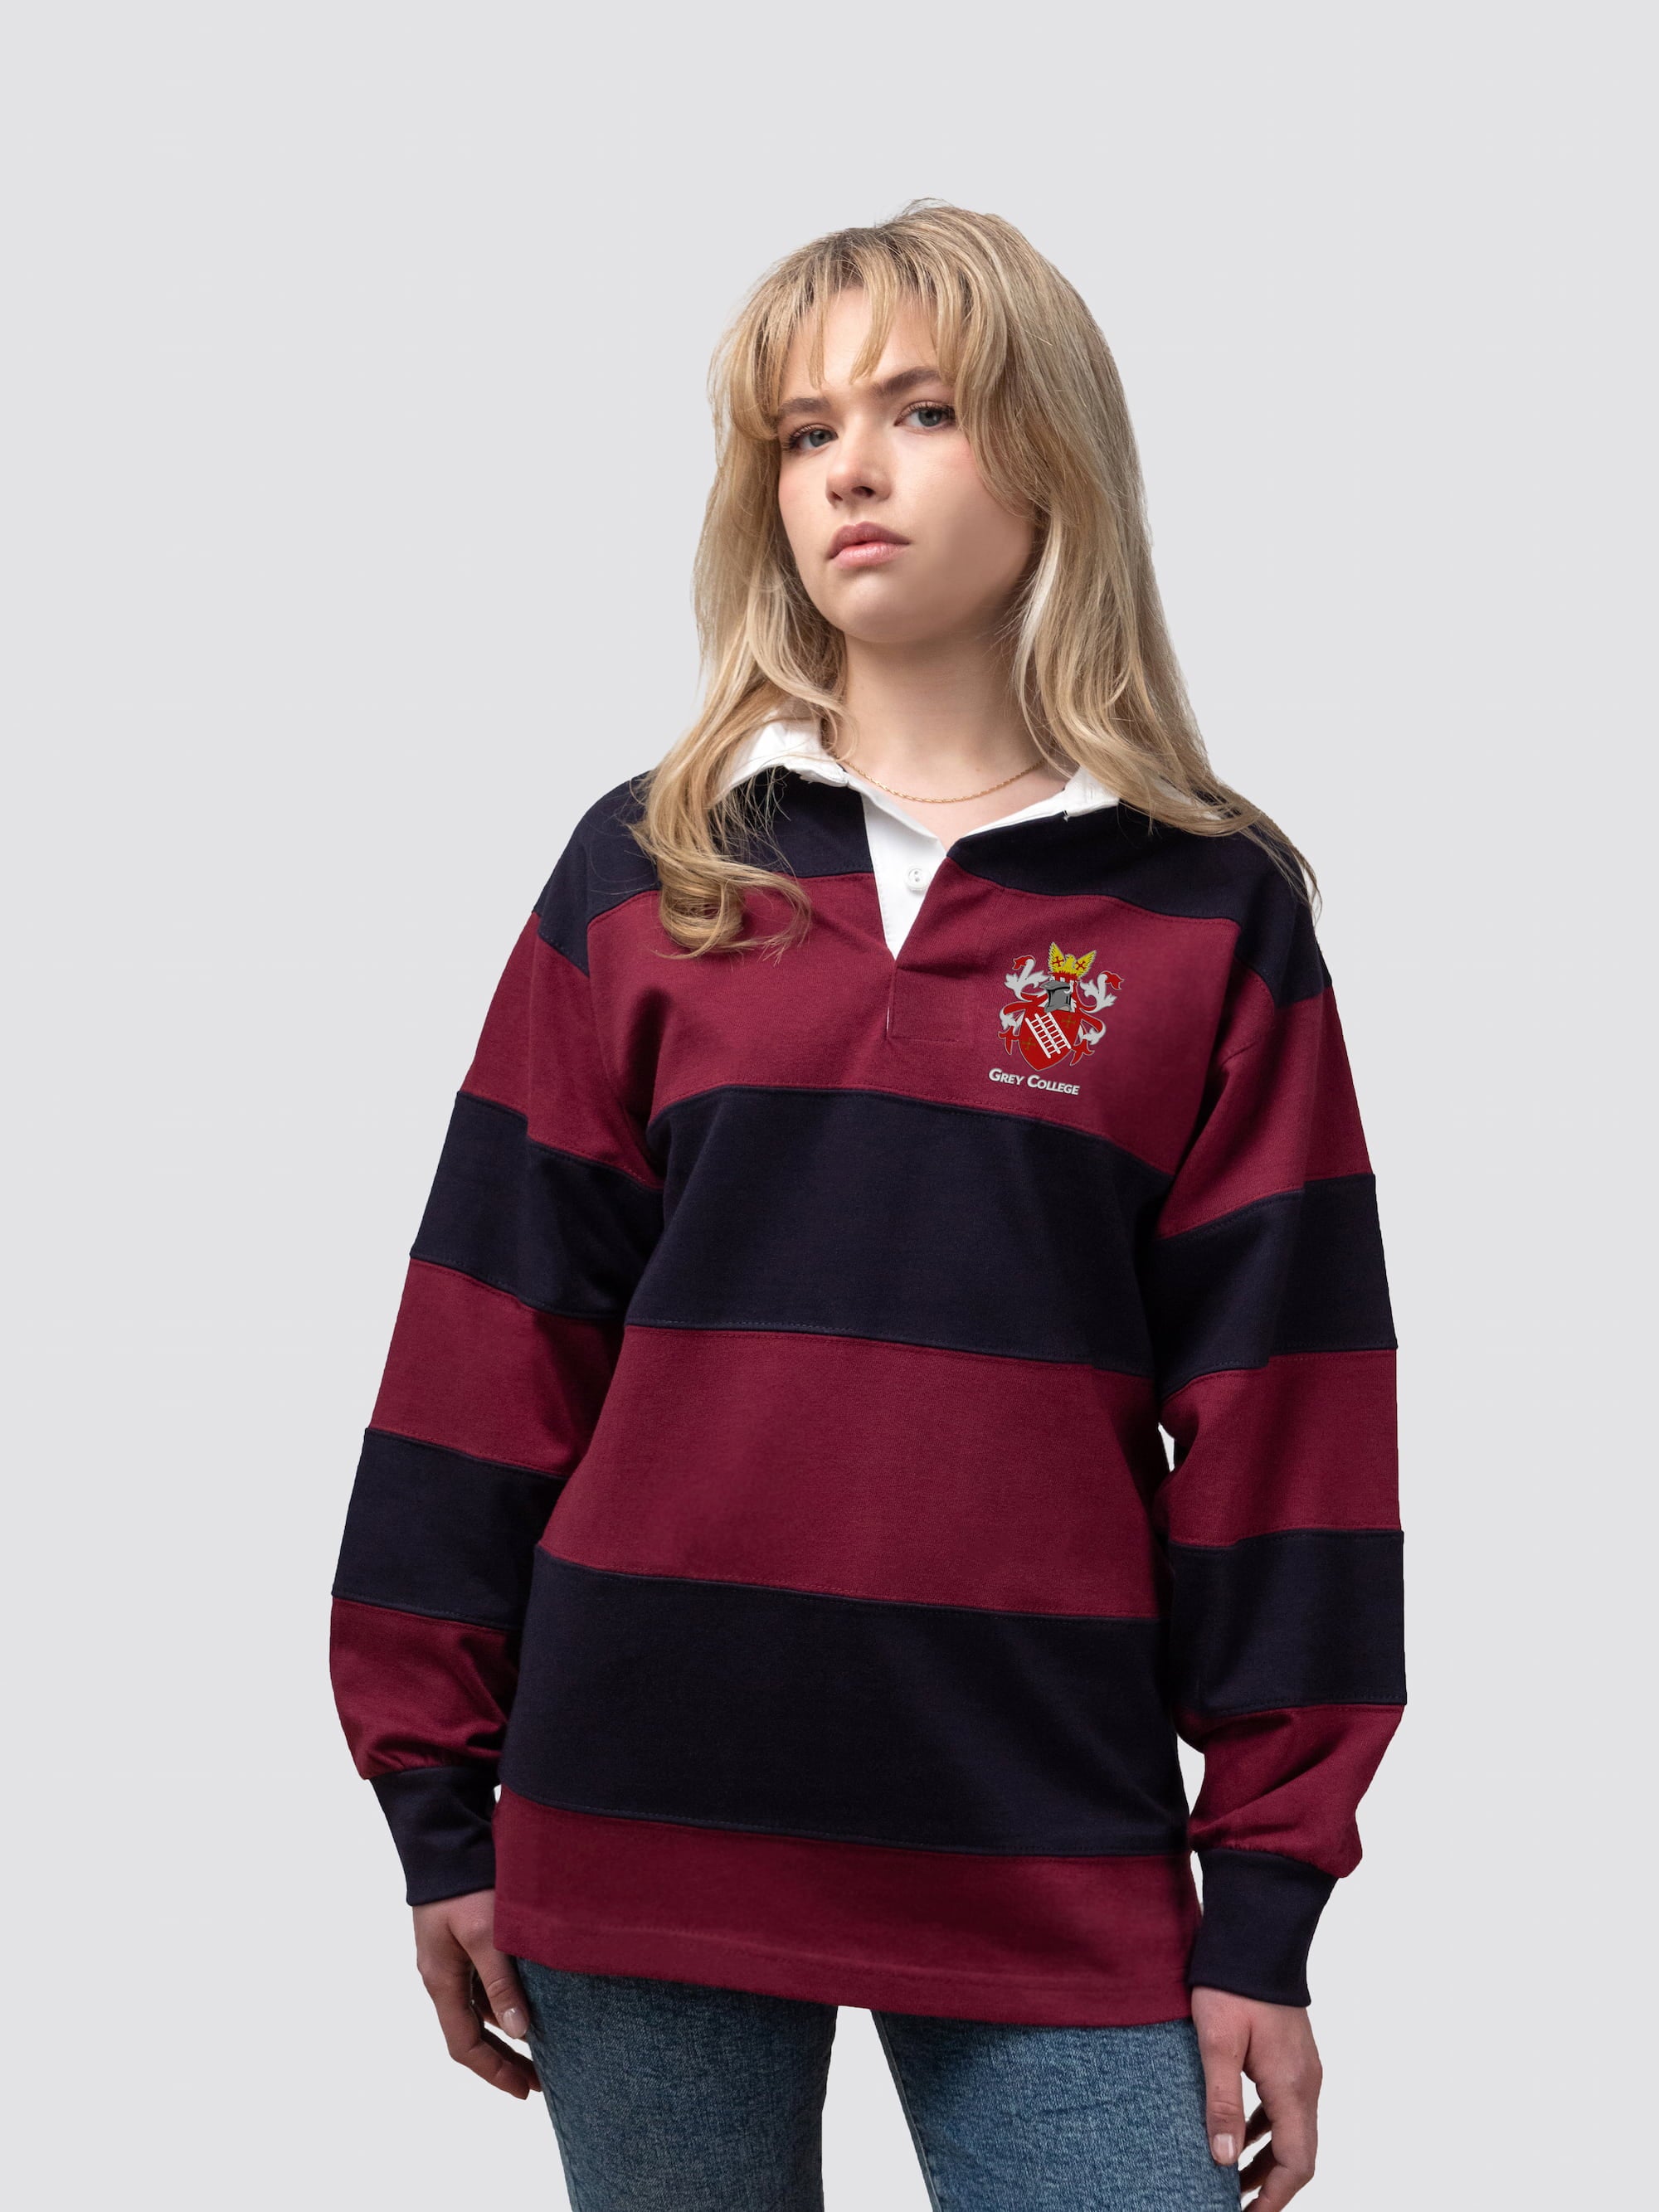 Grey College rugby shirt, with burgundy and navy stripes